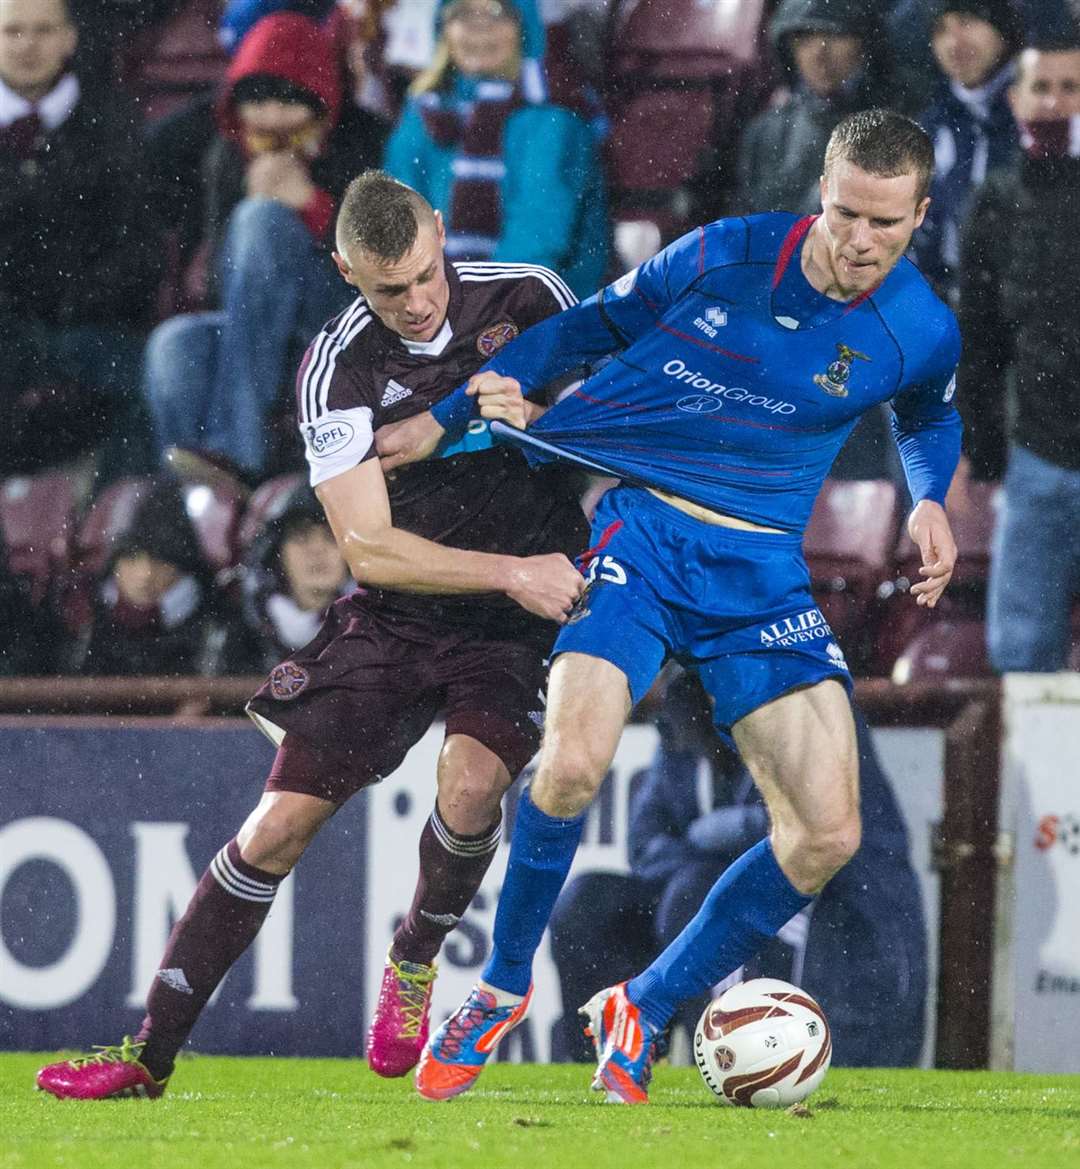 Kevin McHattie (left) playing for Hearts against Inverness Caledonian Thistle.